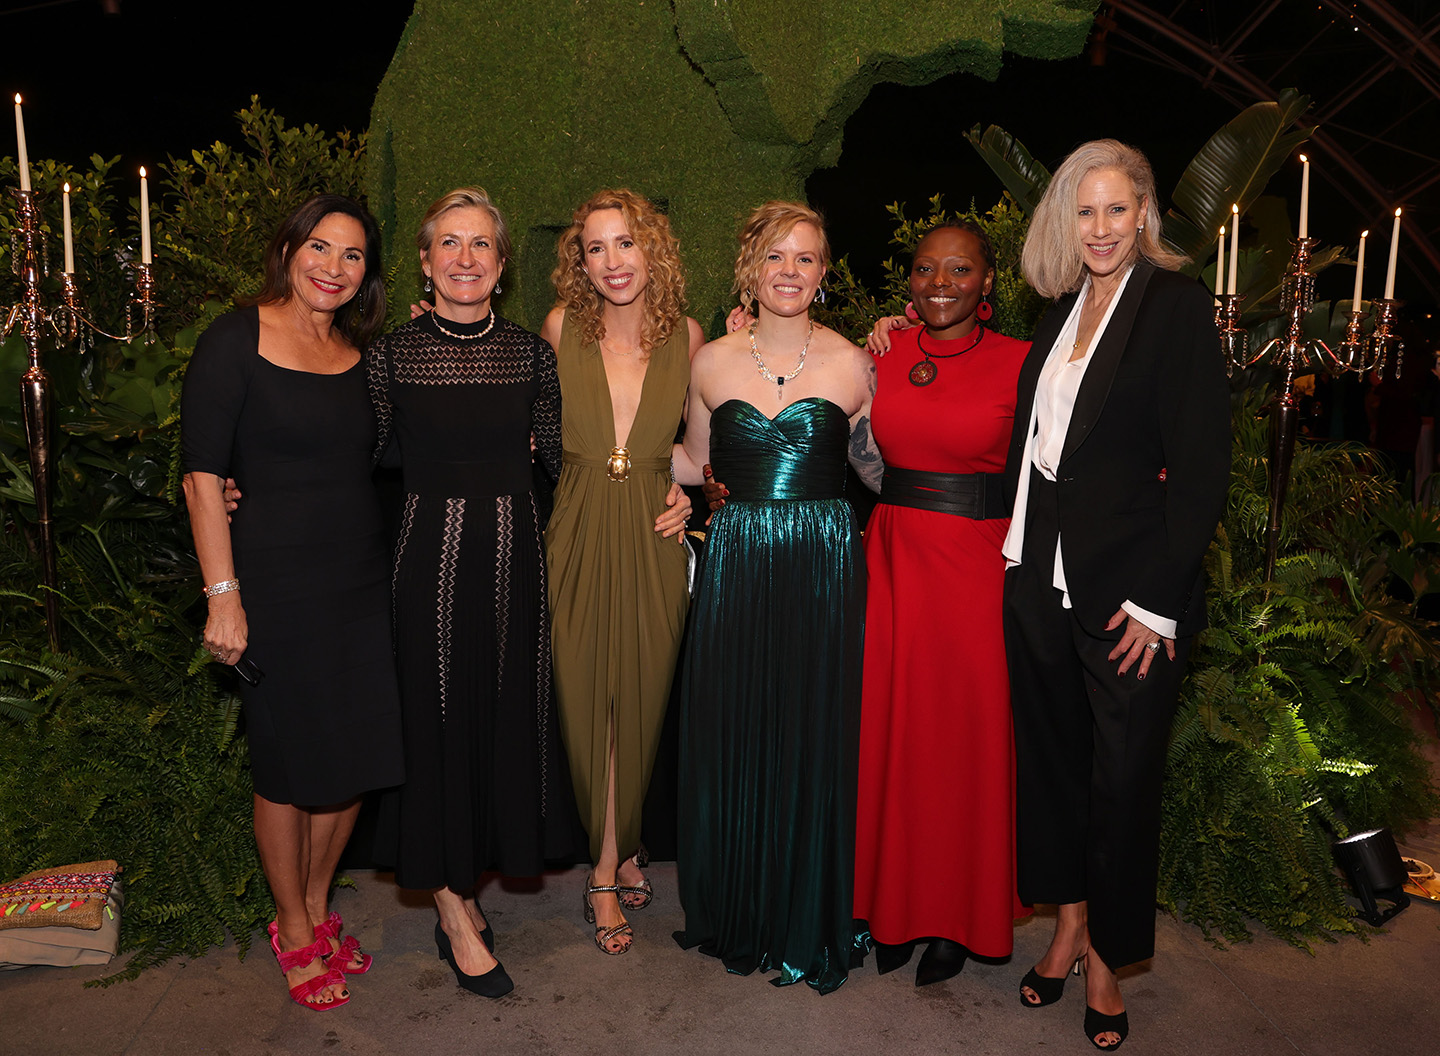 Pam Caragol, Justine Evans, Chloe Sarosh, Erin Ranney, Faith Musembi and Sophie Darlingtion attend the Los Angeles premiere of National Geographic's "QUEENS" on February 8, 2024 at the Academy Museum of Motion Pictures in Los Angeles, CA.